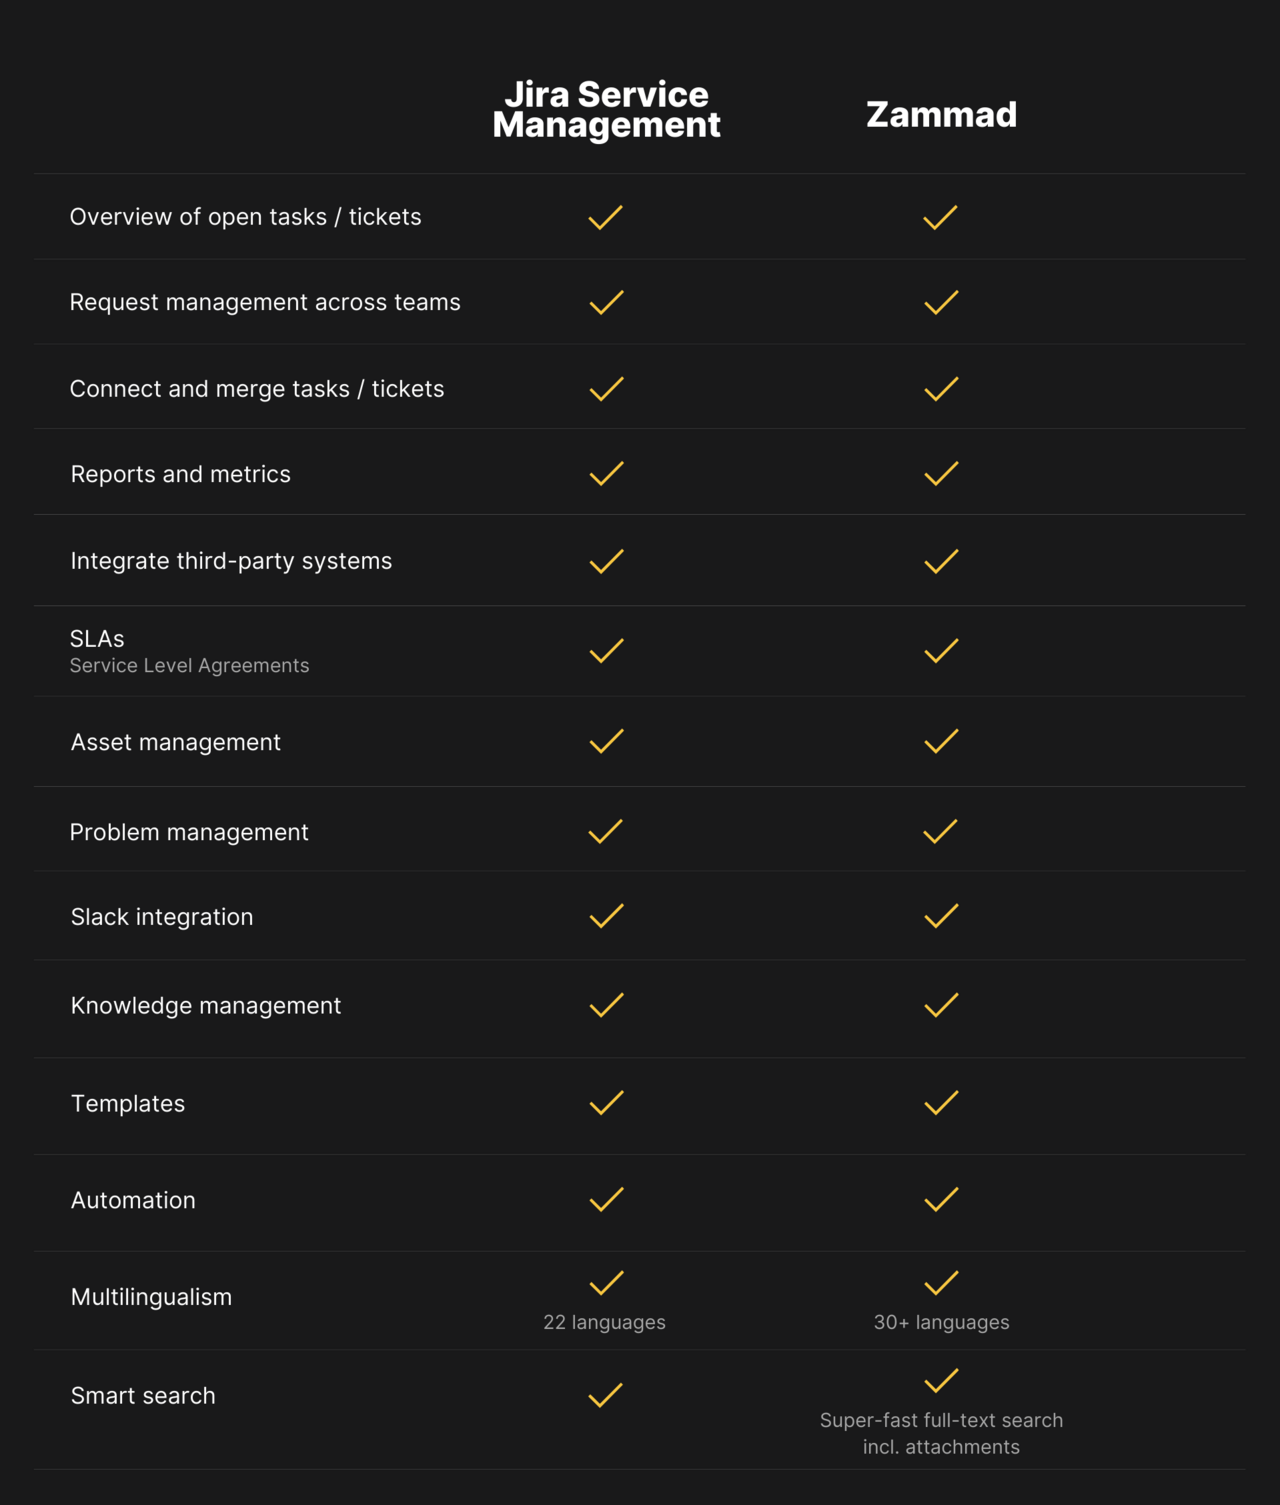 Table comparing the features of Jira Service Management and Zammad